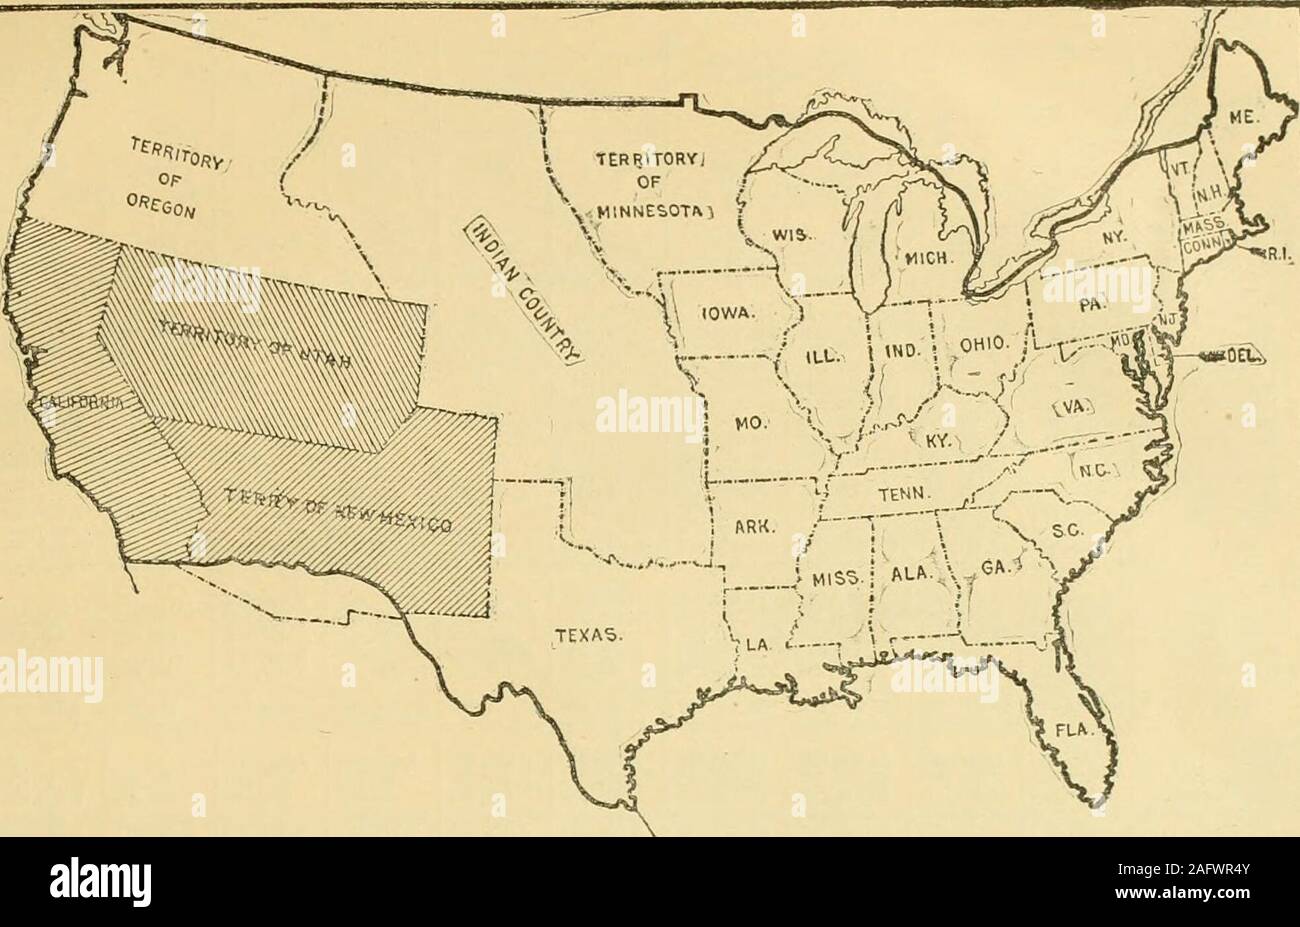 . Territorial expansion of the United States. The additions made to the territory of the thirteen colonies and its transformation into territories and states. 8,239,875 16,447,148 444,675 448,896 1 2,093,951 2,197, 521 Texas 8,011,195 1 5,046,335 75,227,682 | 95,254,682 4,752,640 2,416,721 7,239,696 4,034,063 2,321,246 2,684,987 | 8,073,292 9,316,906 Grand total.. Total United States 31,010,84452,801,907 25,993,62743,902,414 463,556,309913,777,270 694,651,9371,204,298,366 27,547,14144,336,072 30,494,85341,883,065 52,309,796100,659,761 83,591,400122,665,913 22,905,68051,602,780 15,847,48738,651 Stock Photo